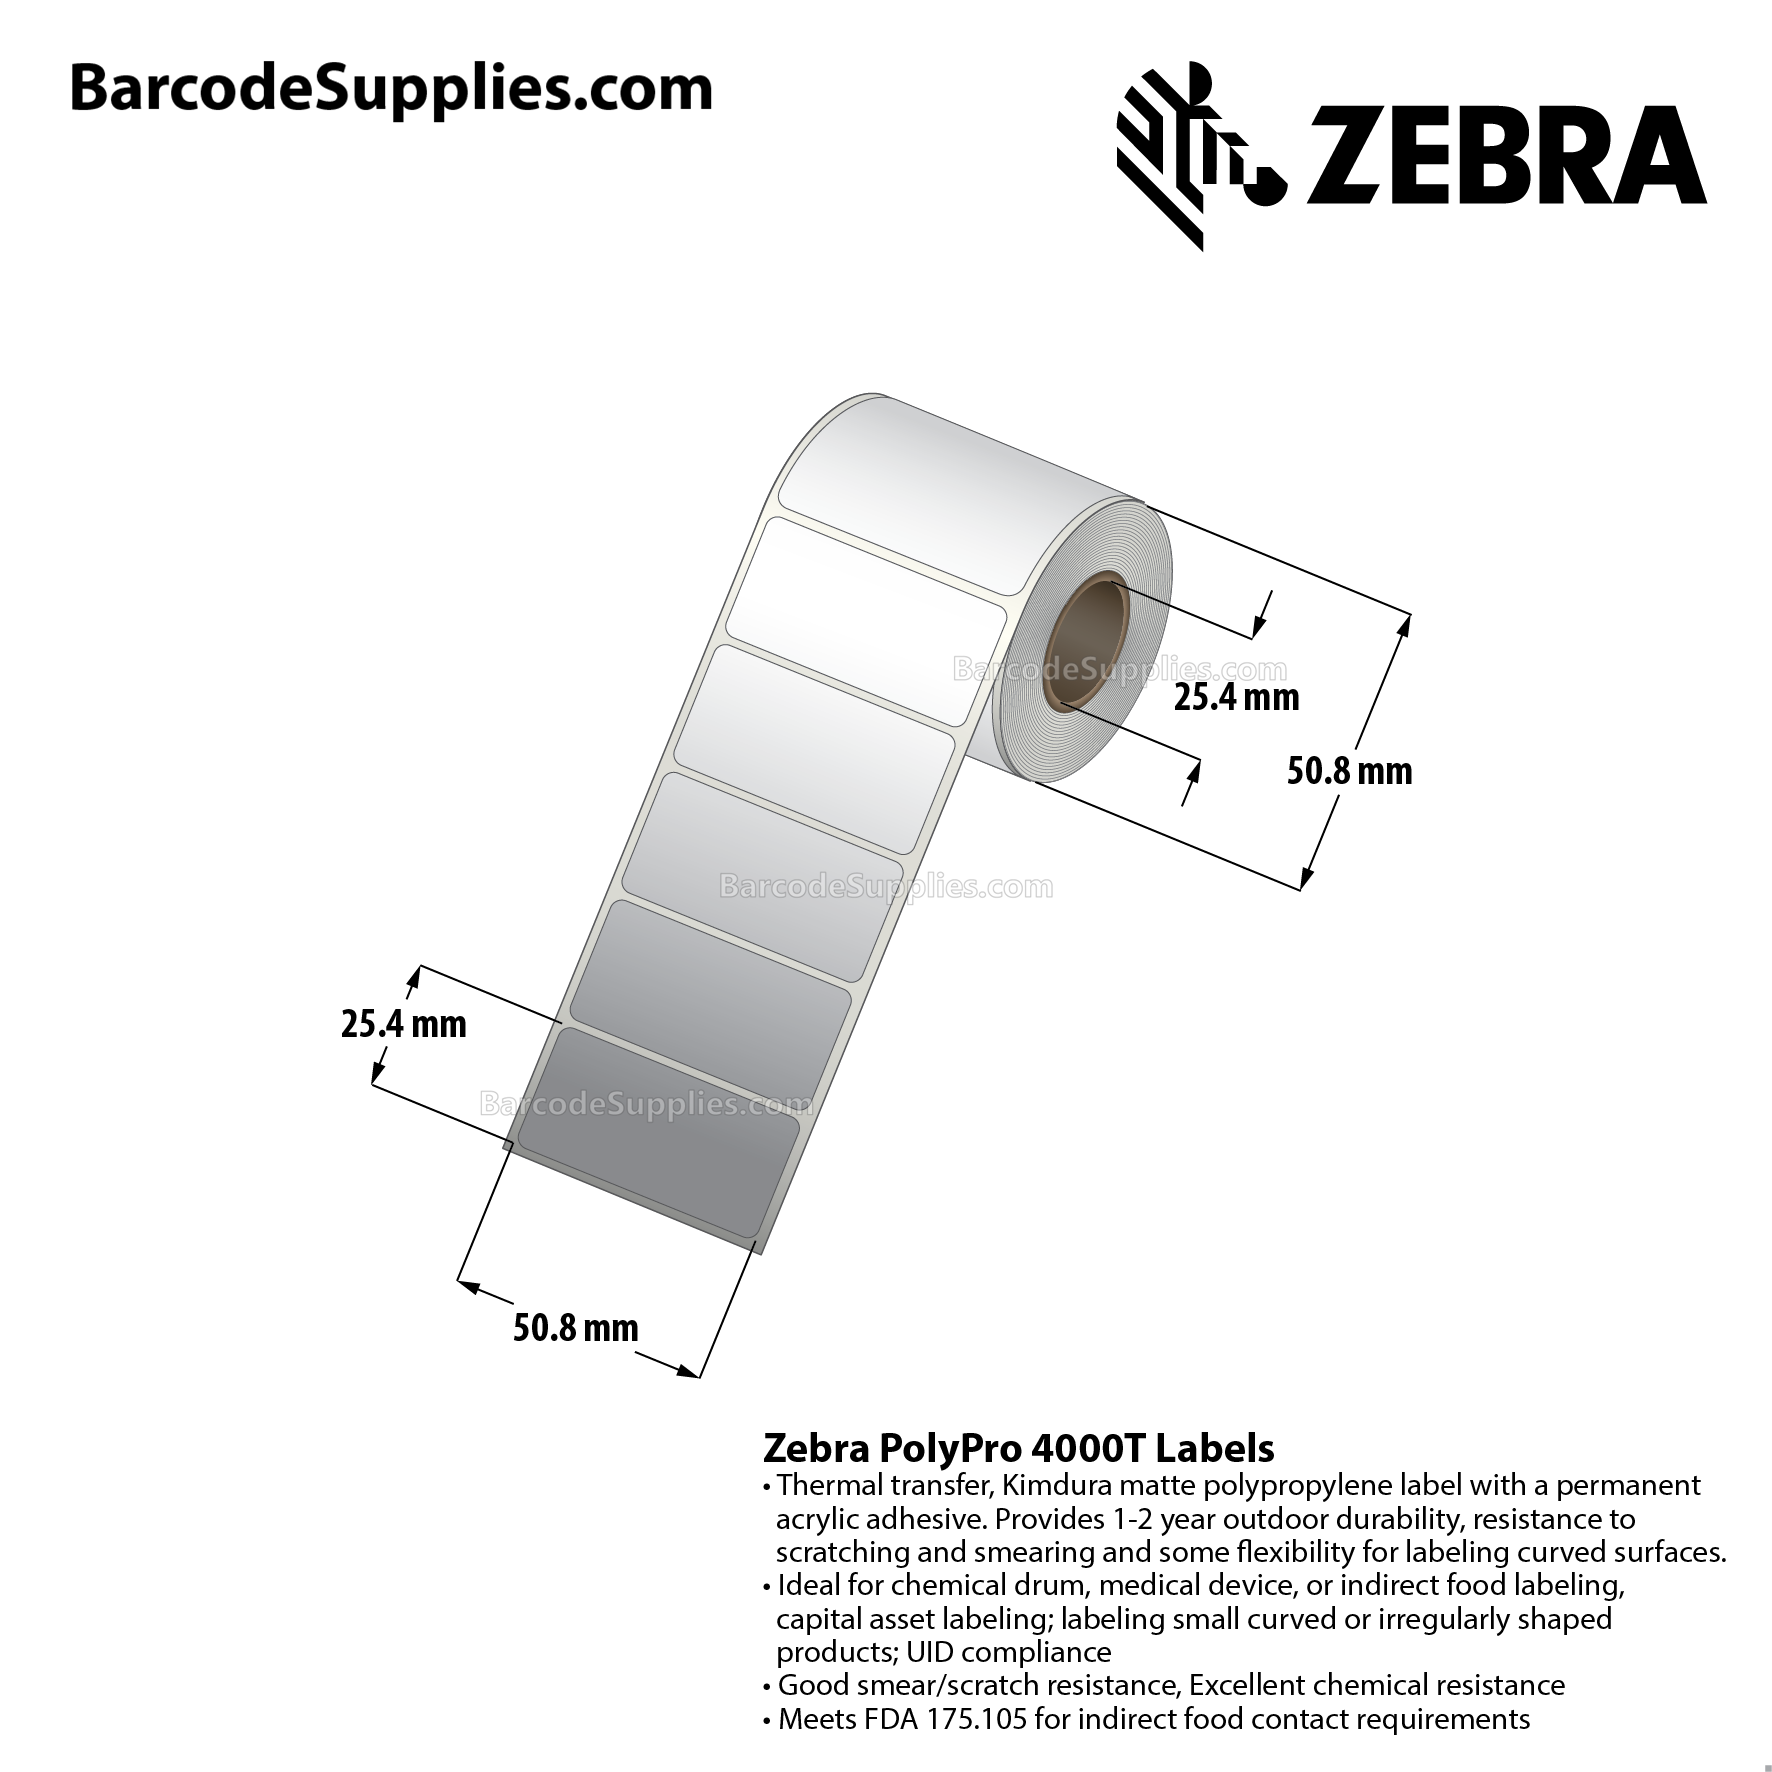 2 x 1 Thermal Transfer White PolyPro 4000T Labels With Permanent Adhesive - Not Perforated - 260 Labels Per Roll - Carton Of 12 Rolls - 3120 Labels Total - MPN: 82414